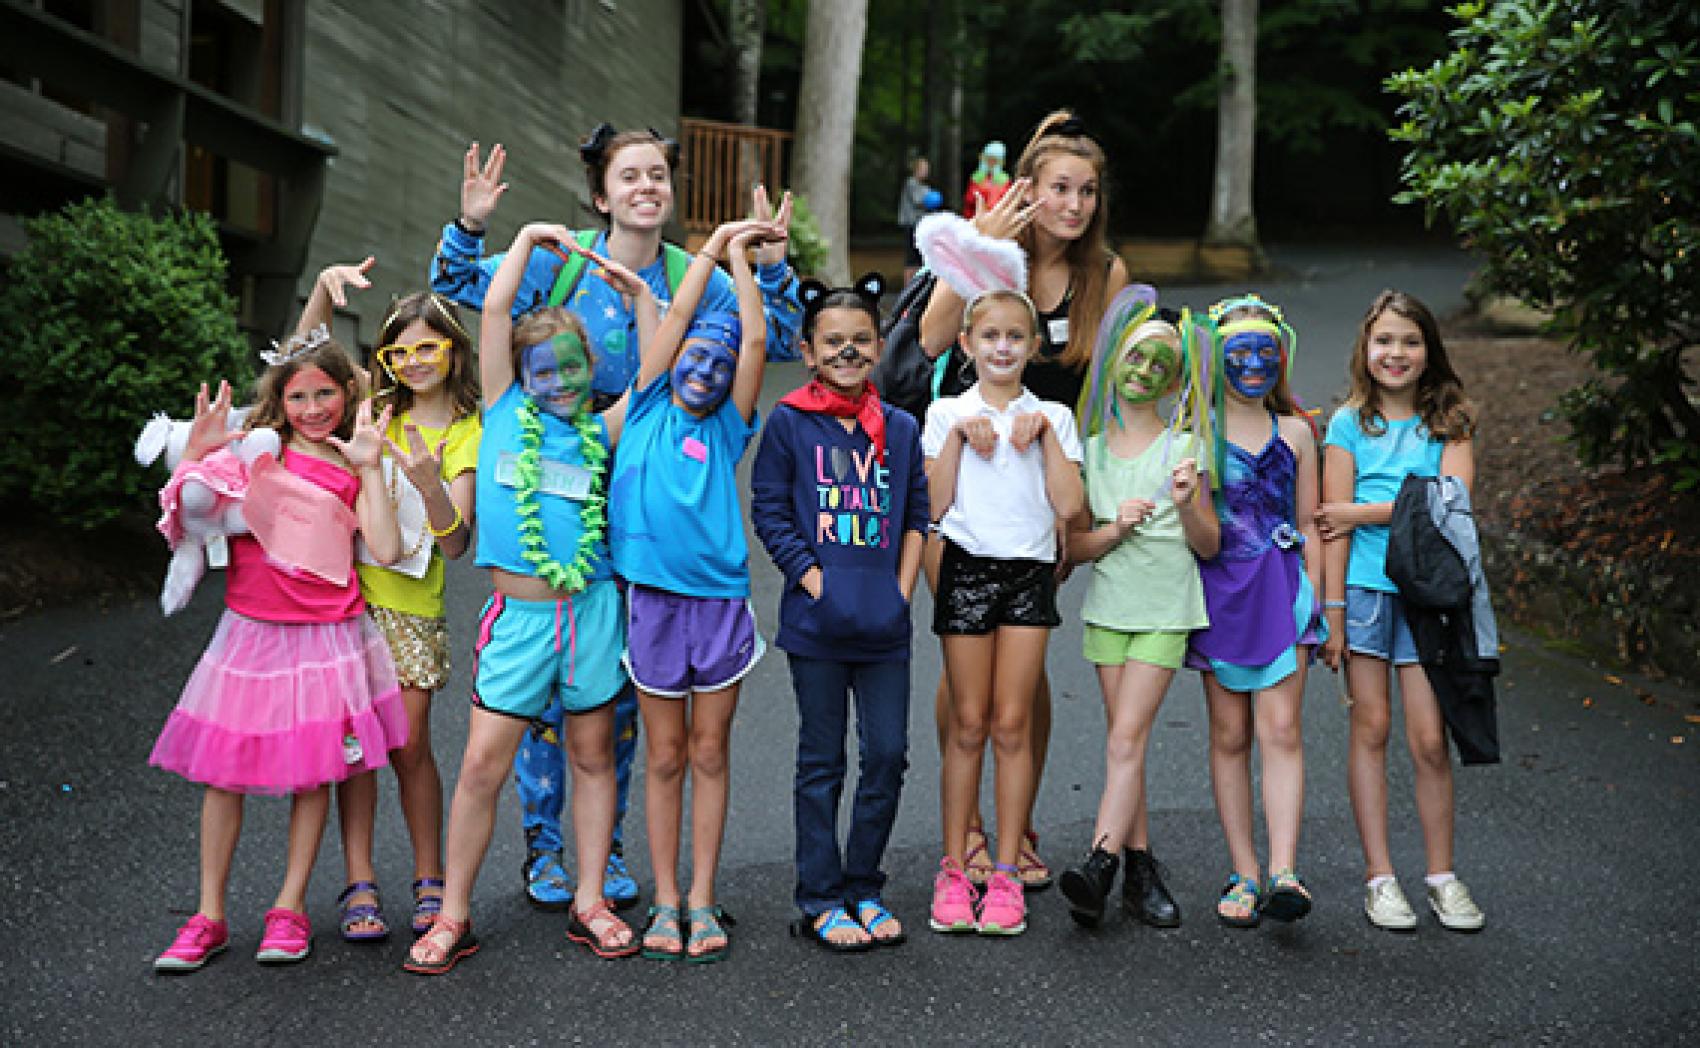 campers dressed up in costume